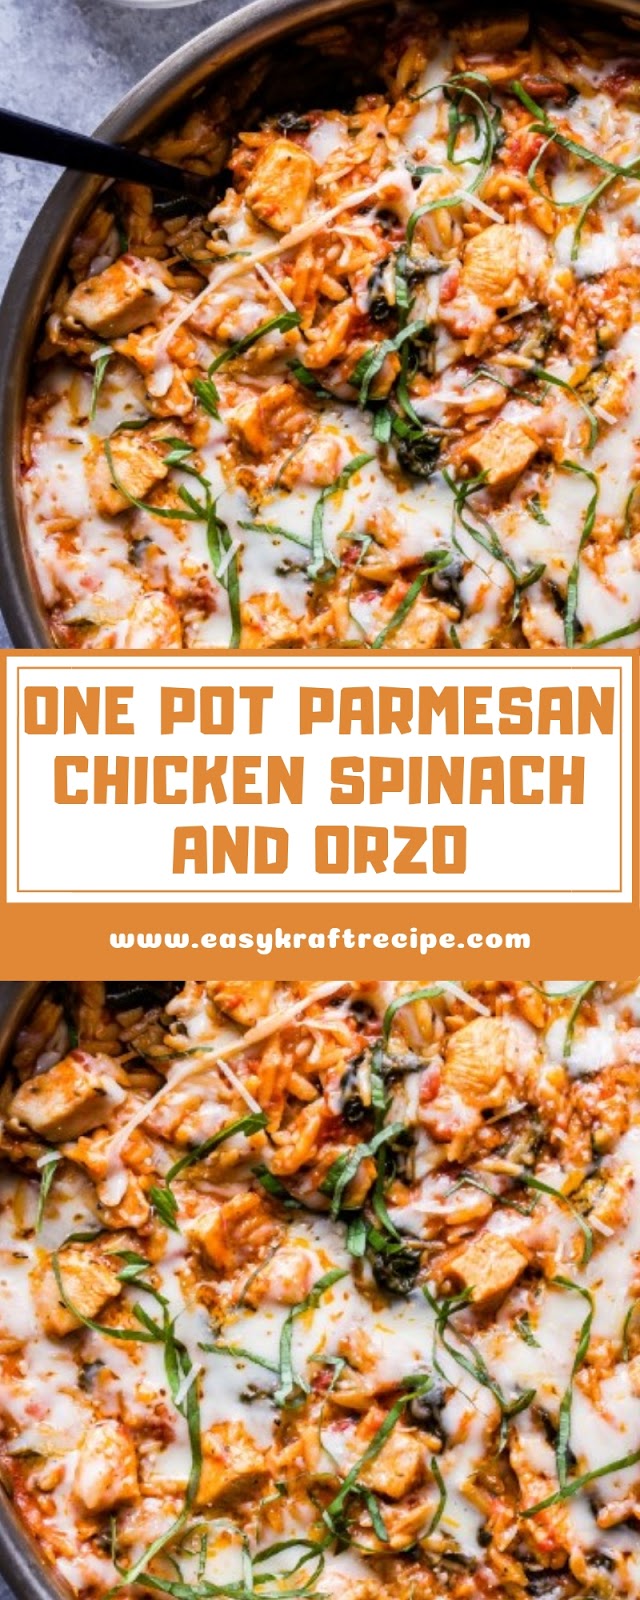 ONE POT PARMESAN CHICKEN SPINACH AND ORZO